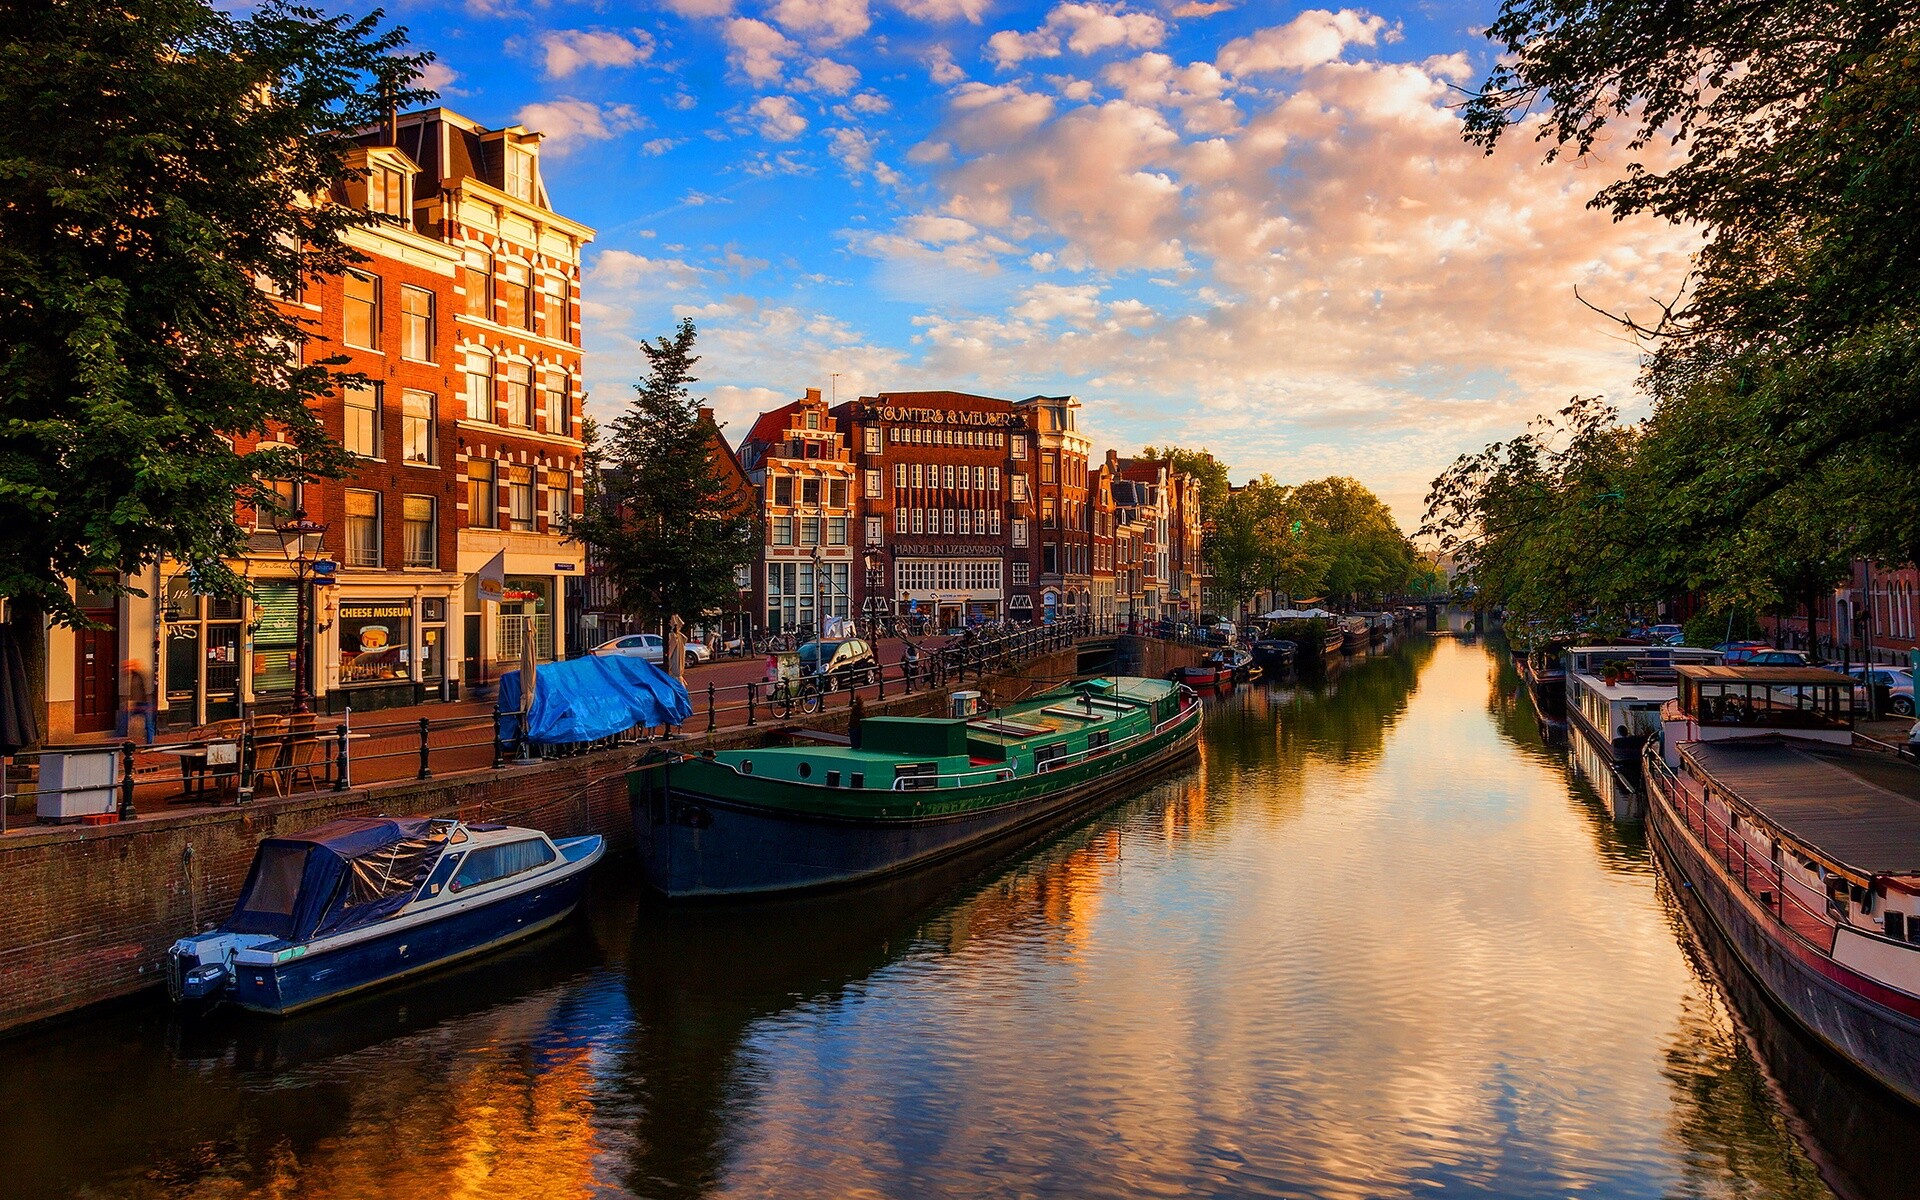 Amsterdam: The “Venice of the North”, 100 kilometers of canals, about 90 islands and 1,500 bridges. 1920x1200 HD Wallpaper.